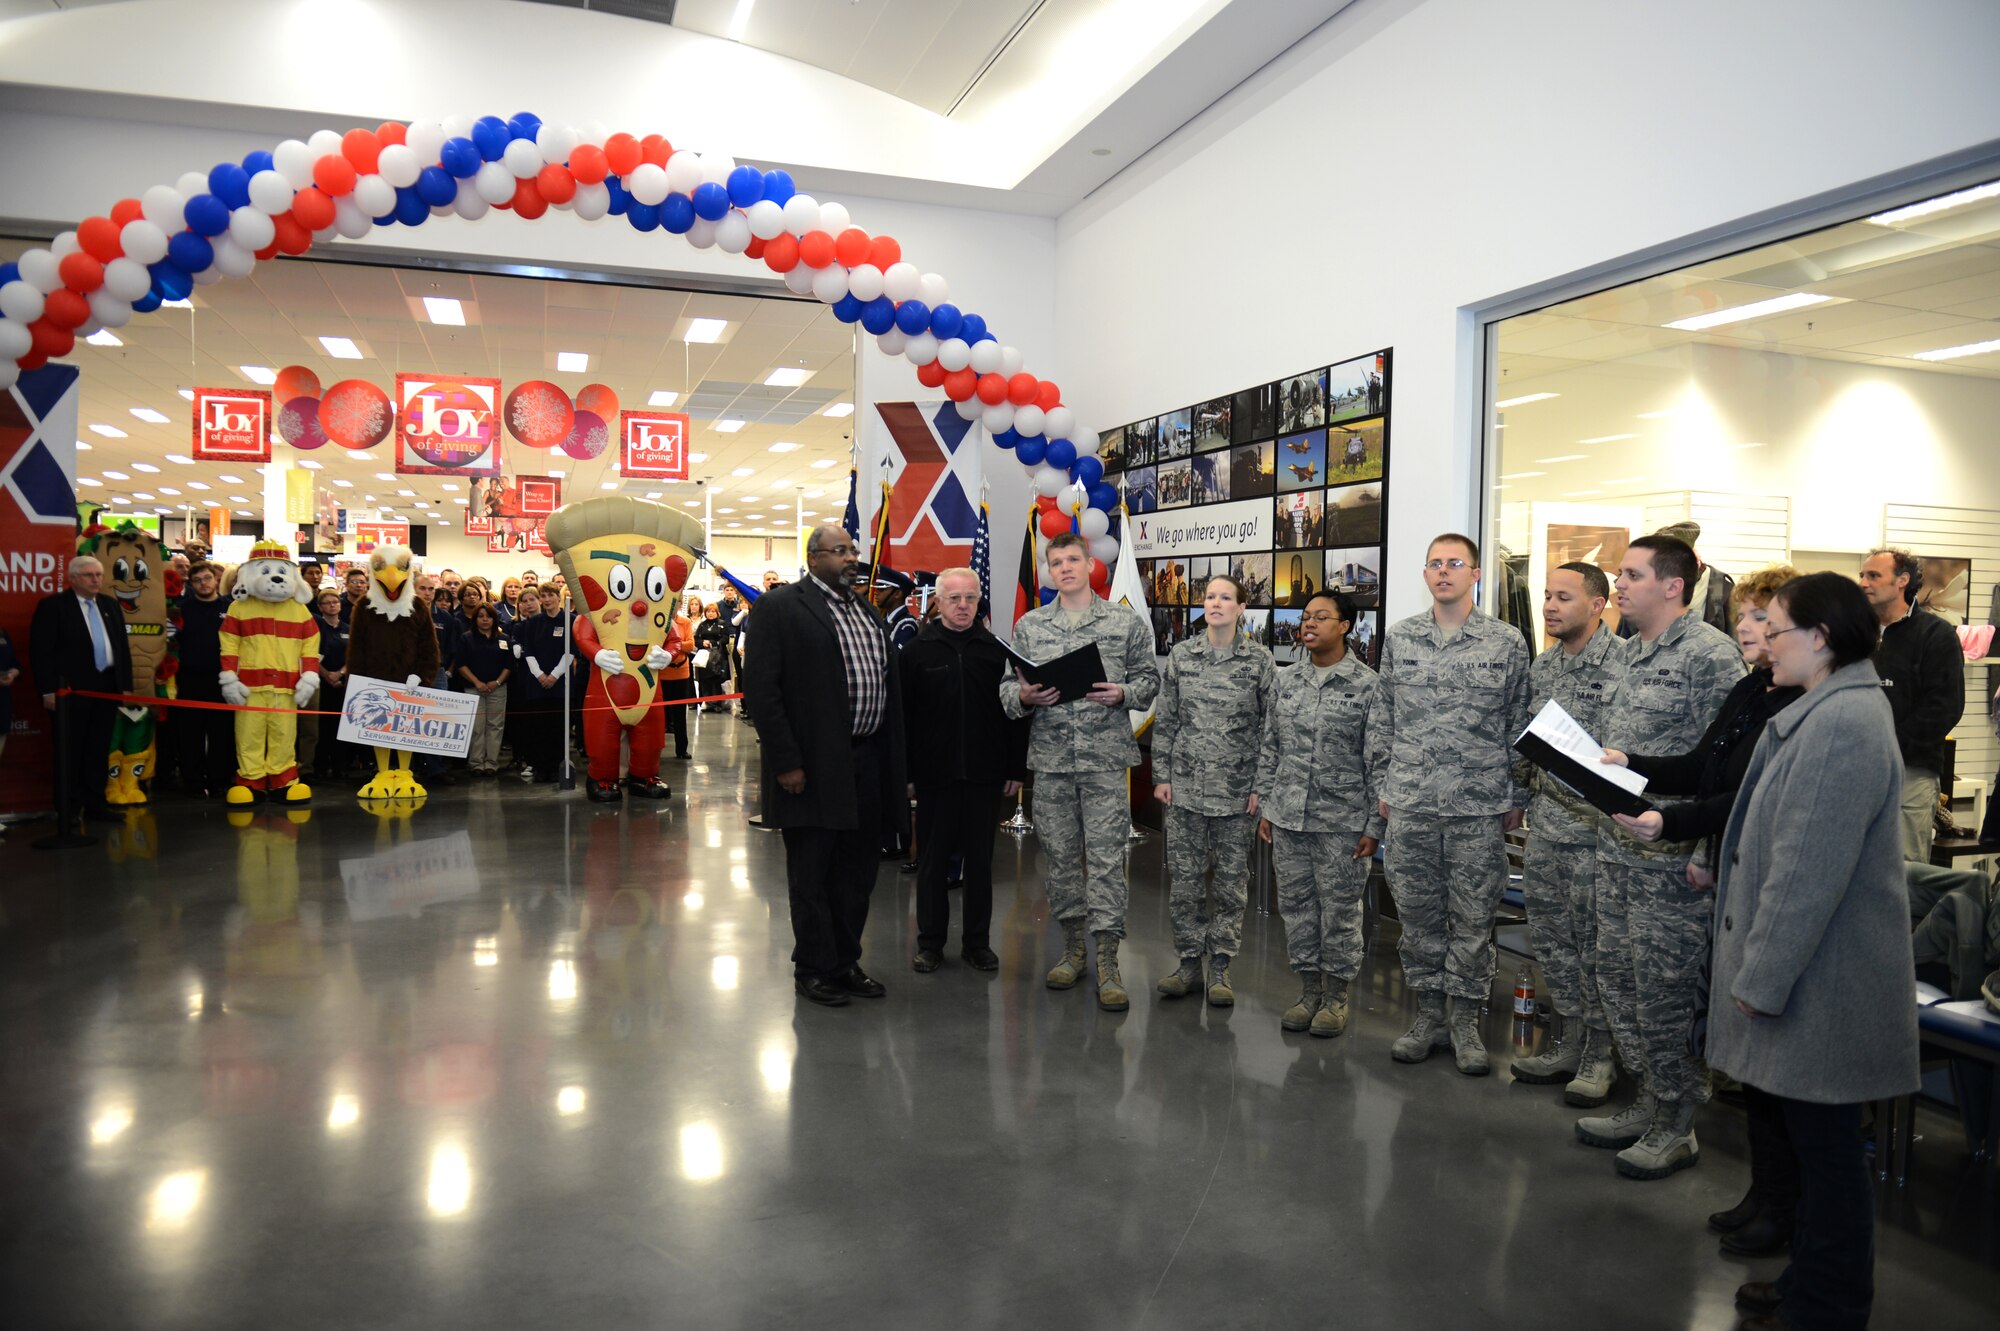 SPANGDAHLEM AIR BASE, Germany – The Saber Singers perform during the grand opening ceremony of the Spangdahlem Exchange Nov. 2, 2012.  The new Exchange includes the main retail store, a flower shop, military clothing sales, alterations and dry cleaning services, a barber shop, a food court and various concessionaires with a goal to provide a convenient one-stop shopping experience for the Spangdahlem community. (U.S. Air Force photo by Airman 1st Class Gustavo Castillo/Released)